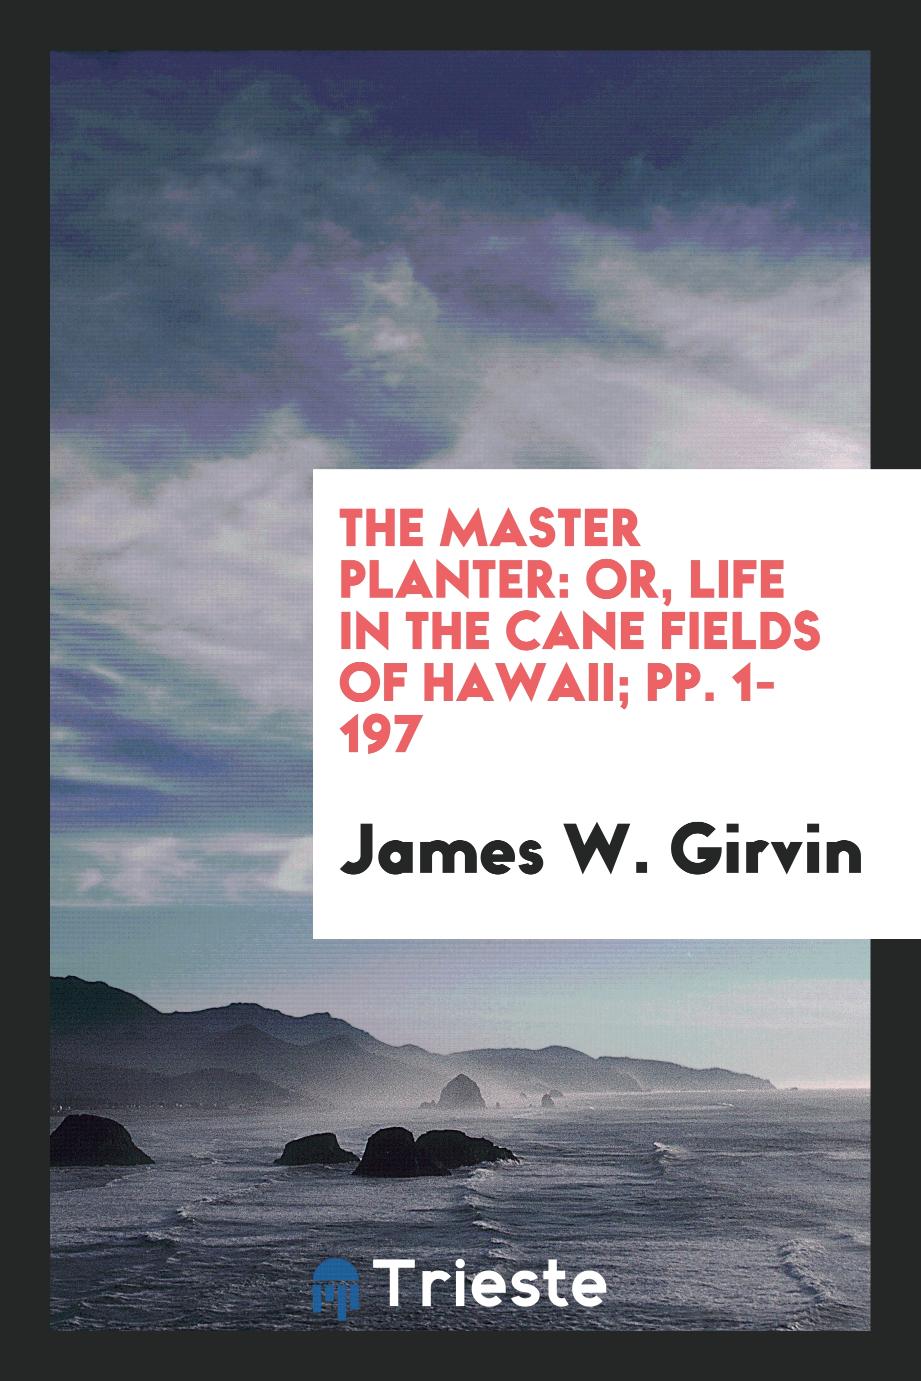 The Master Planter: Or, Life in the Cane Fields of Hawaii; pp. 1-197